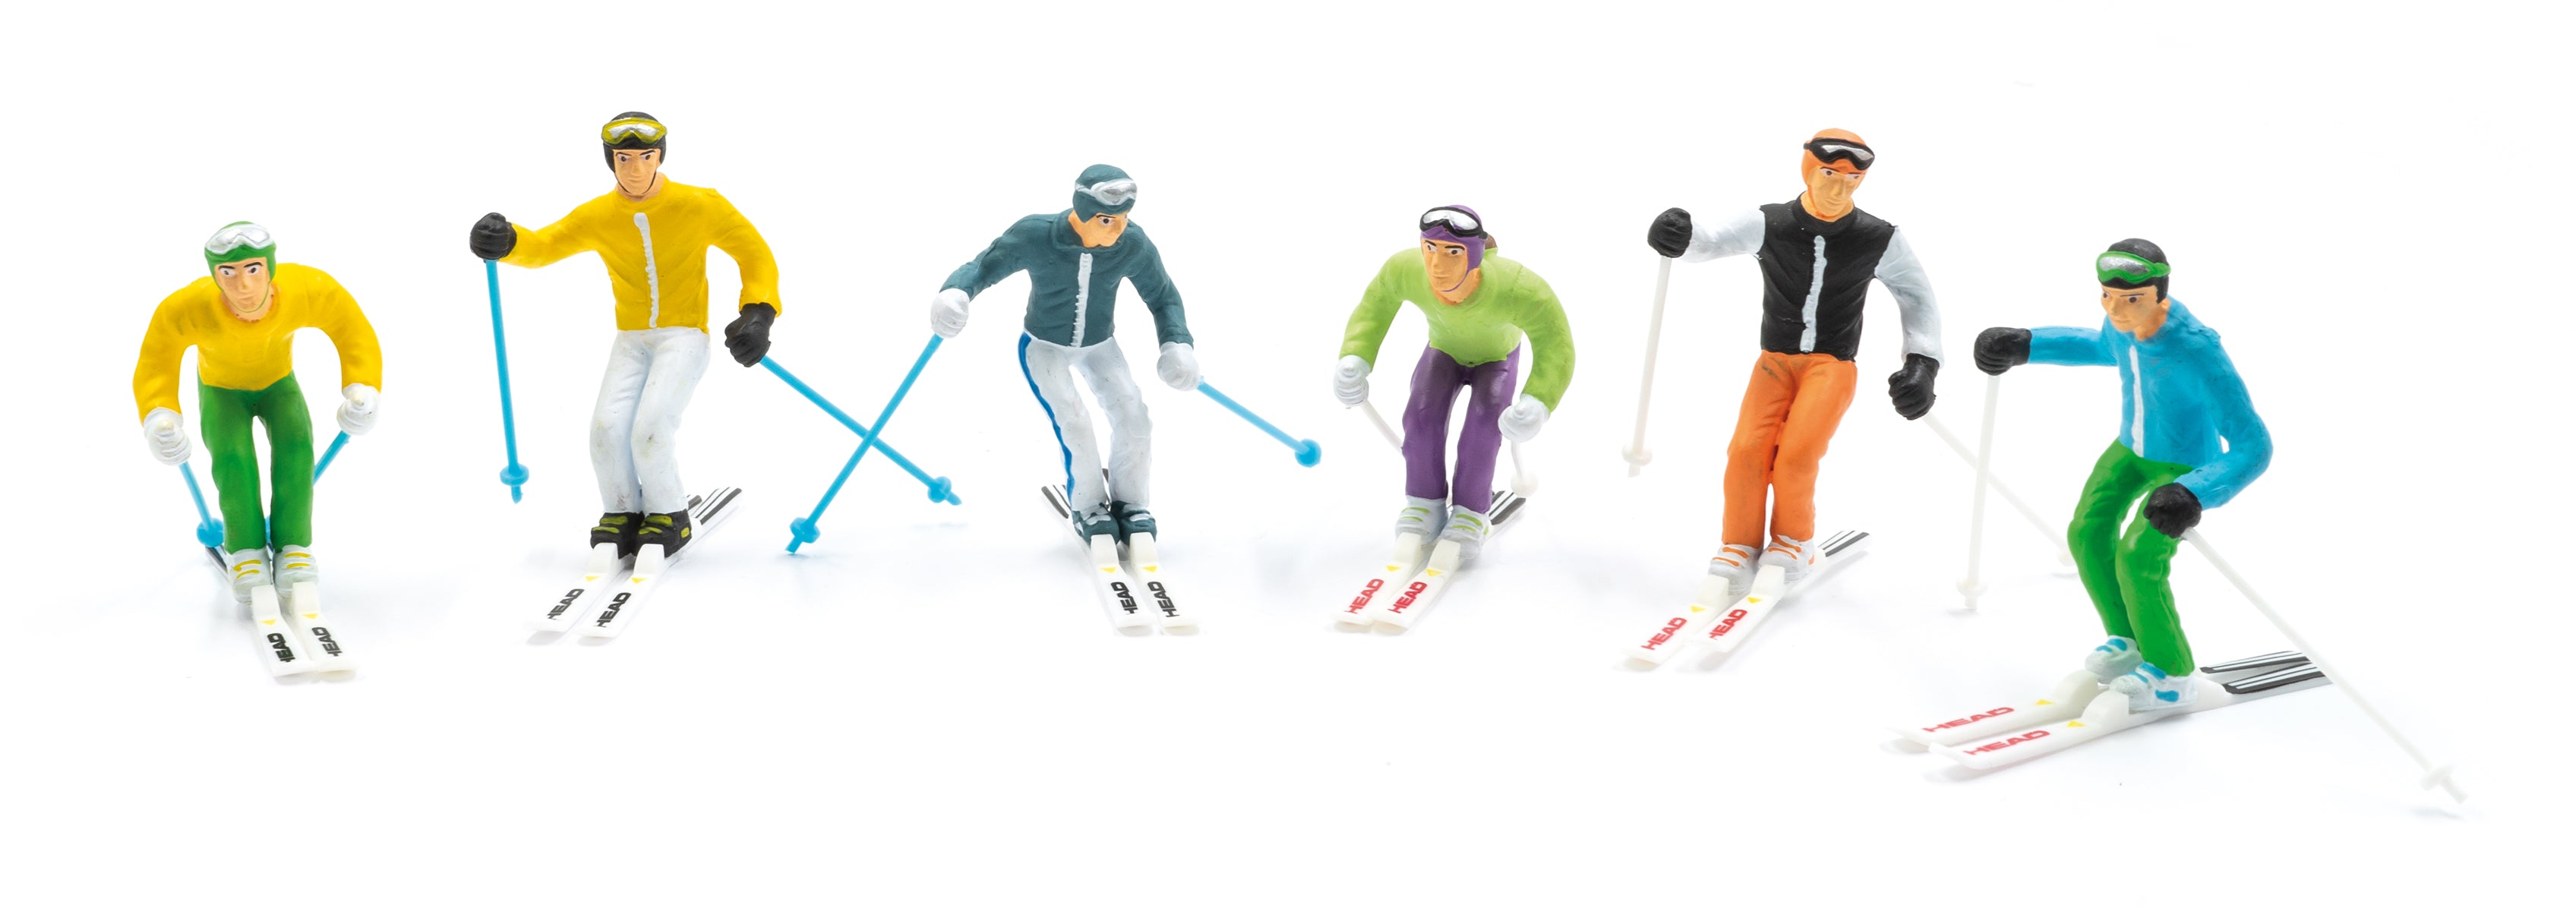 Figurines sitting with skis